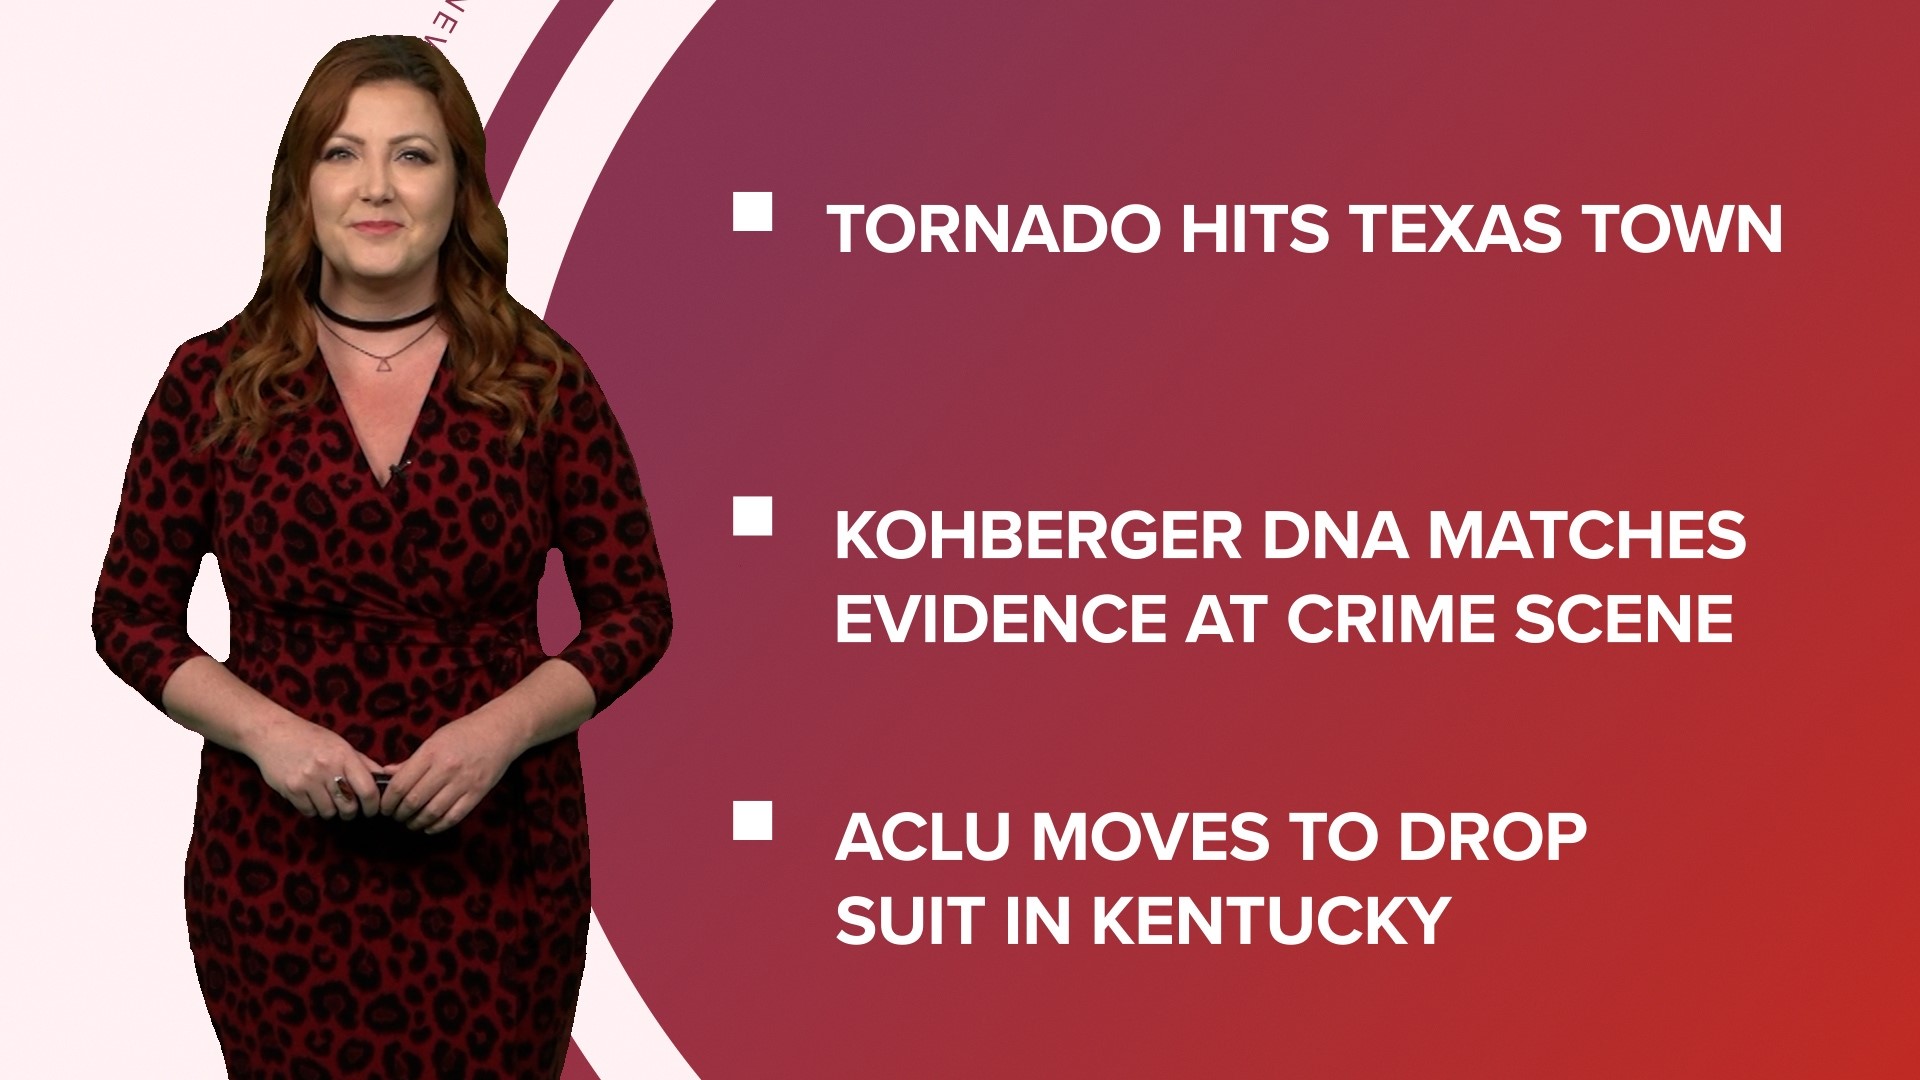 A look at what is happening in the news from a tornado touches down in a Texas down to DNA evidence in the Idaho murders case and the FTC suing Amazon.